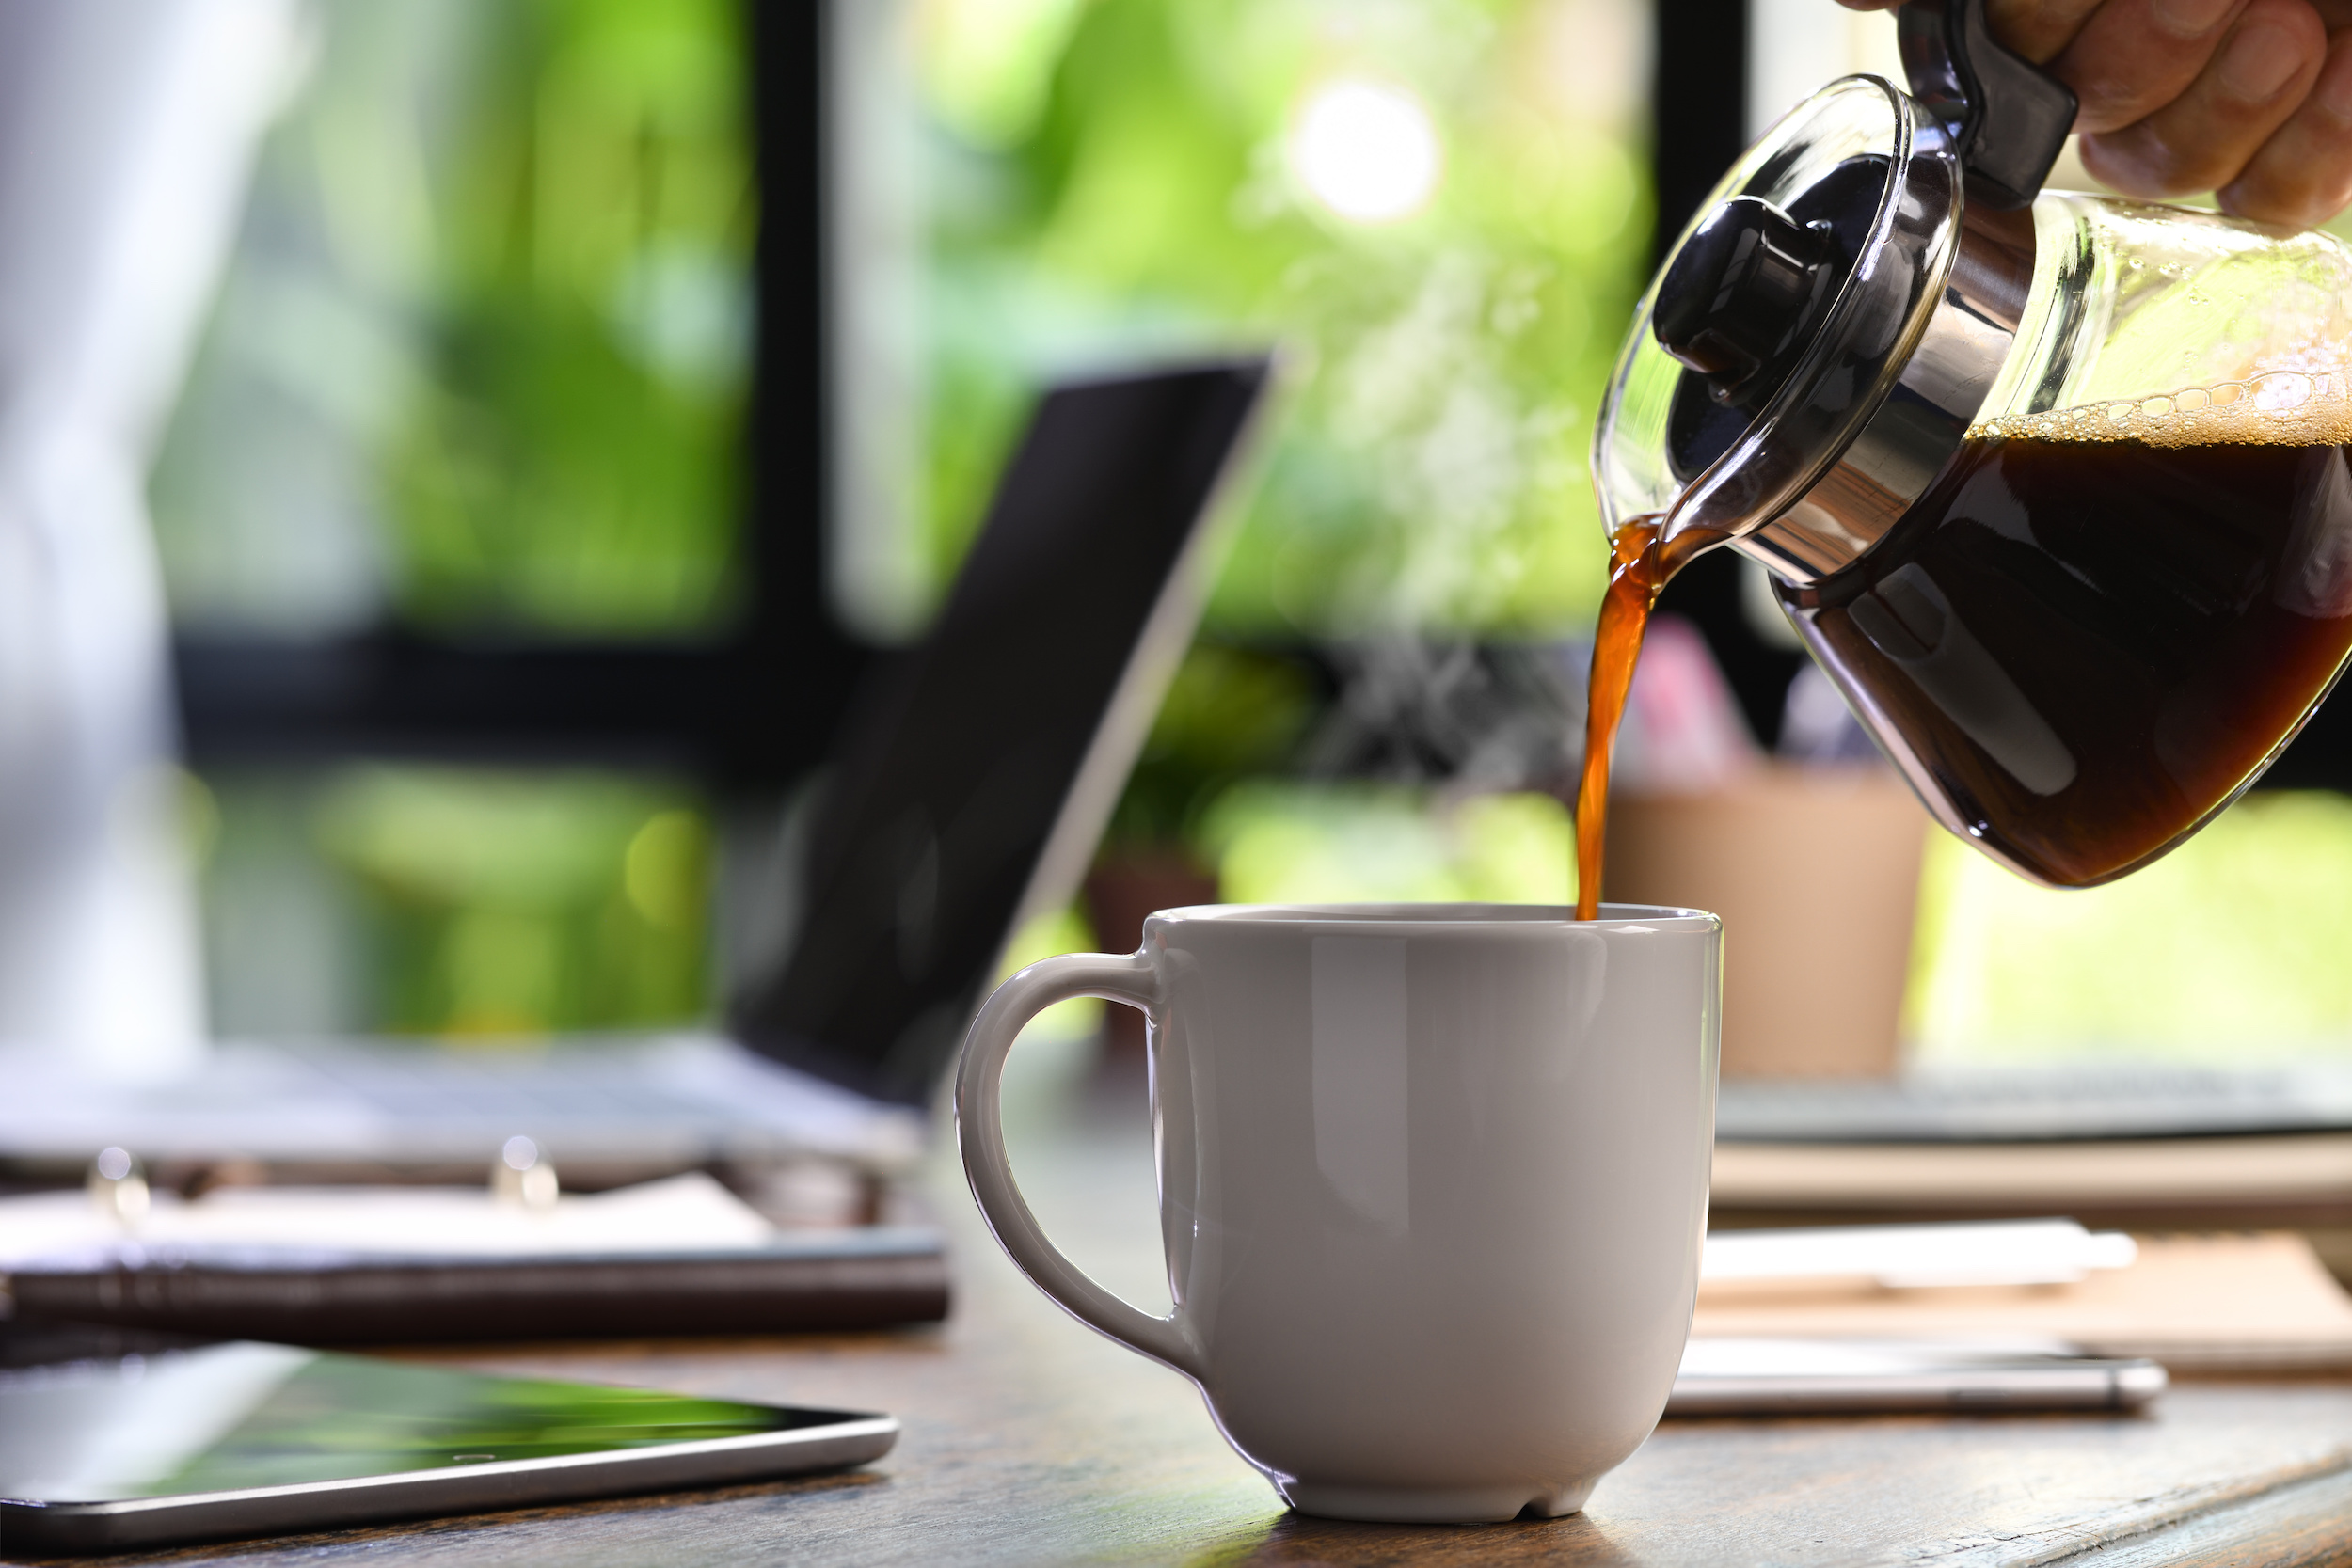 Best coffee makers for working from home